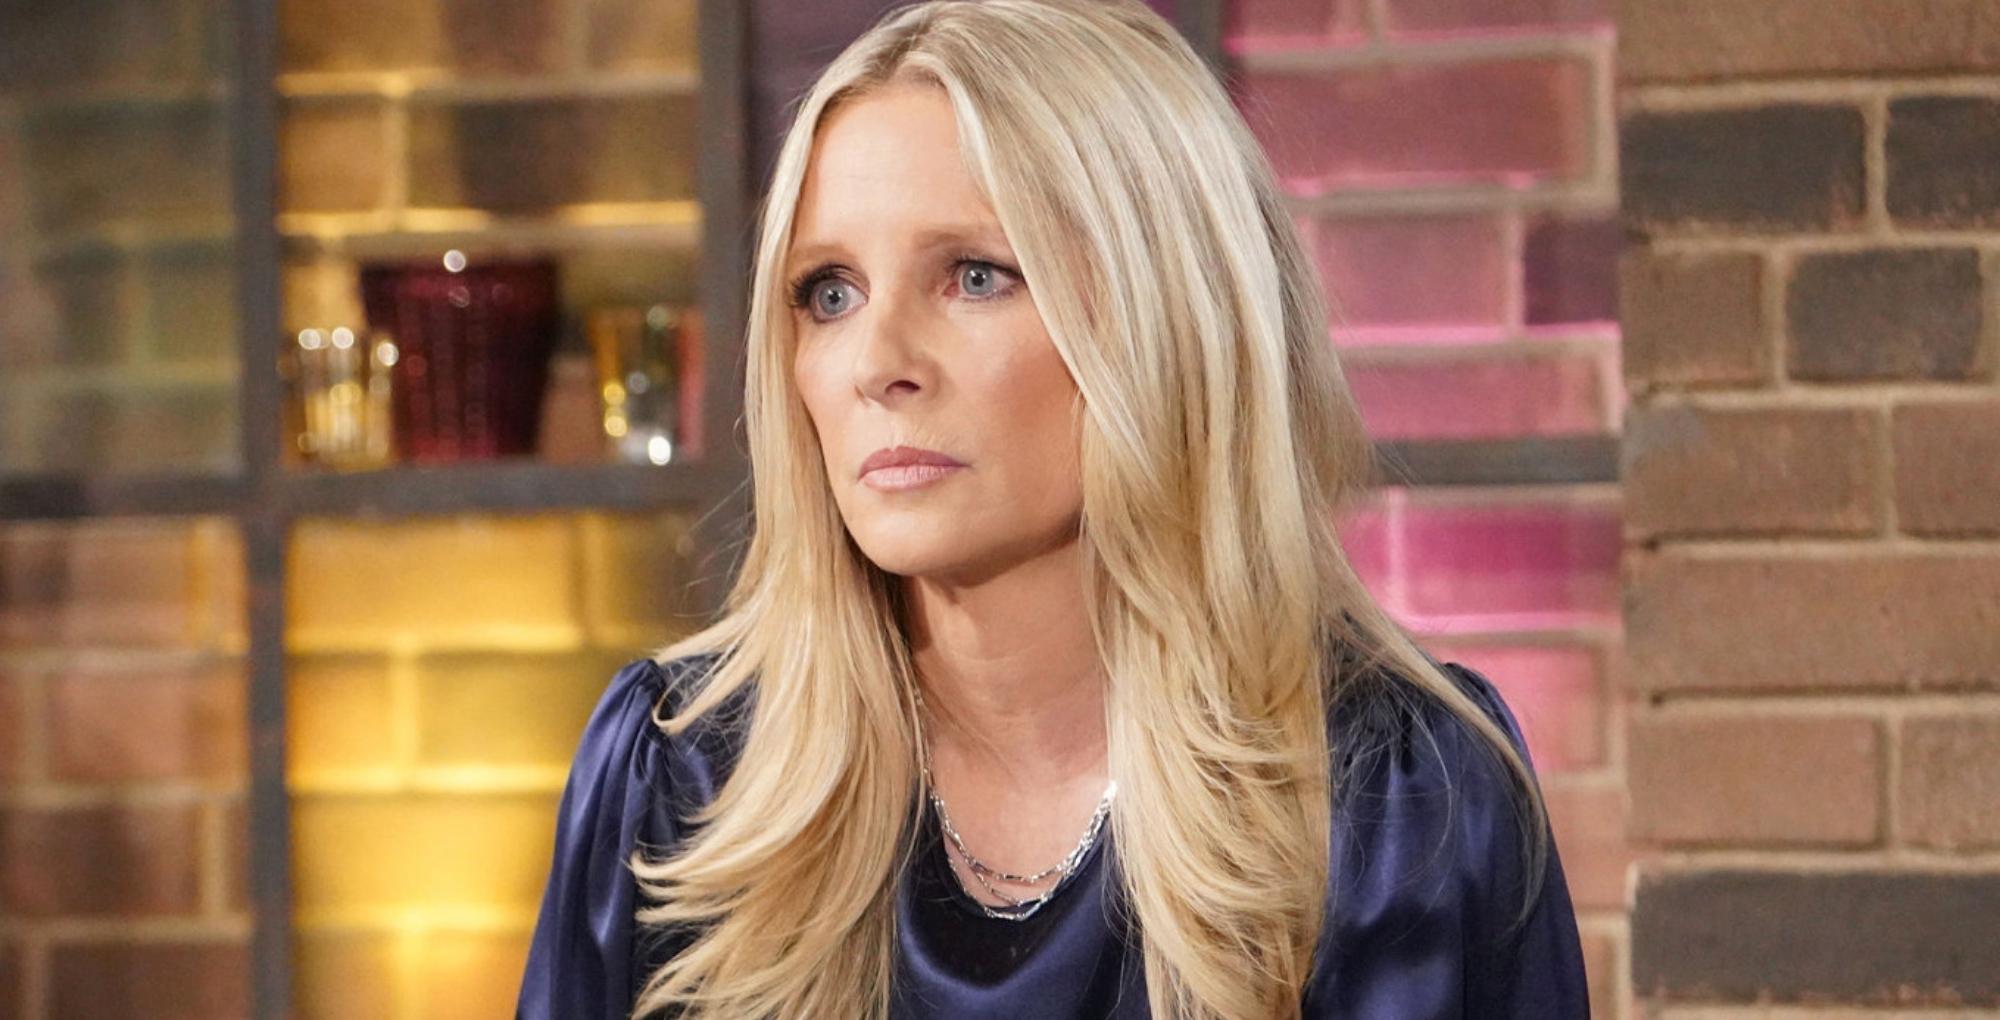 christine williams is sad over the end of her marriage in the young and the restless recap for april 11, 2023.